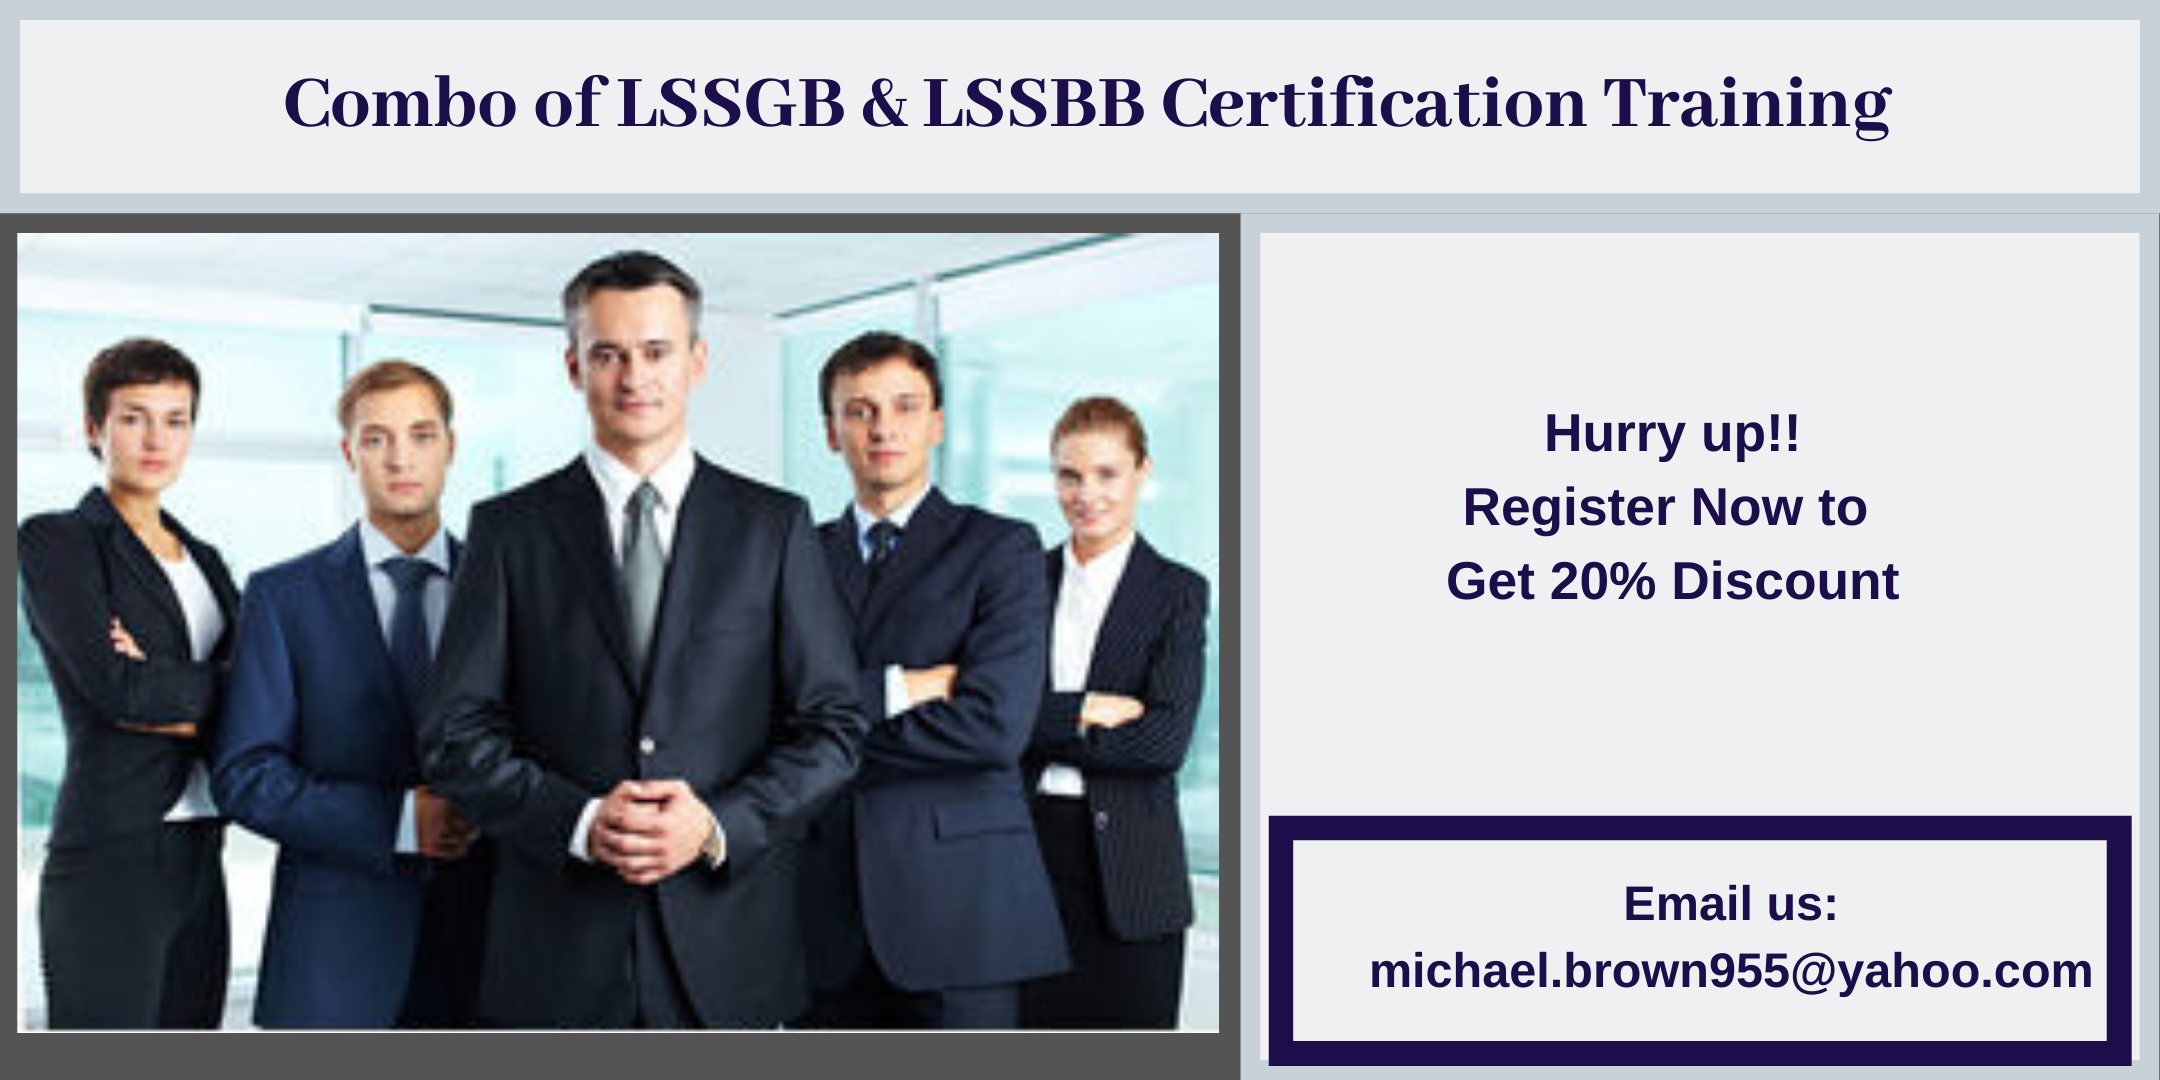 Combo of LSSGB & LSSBB 4 days Certification Training in Alameda, CA